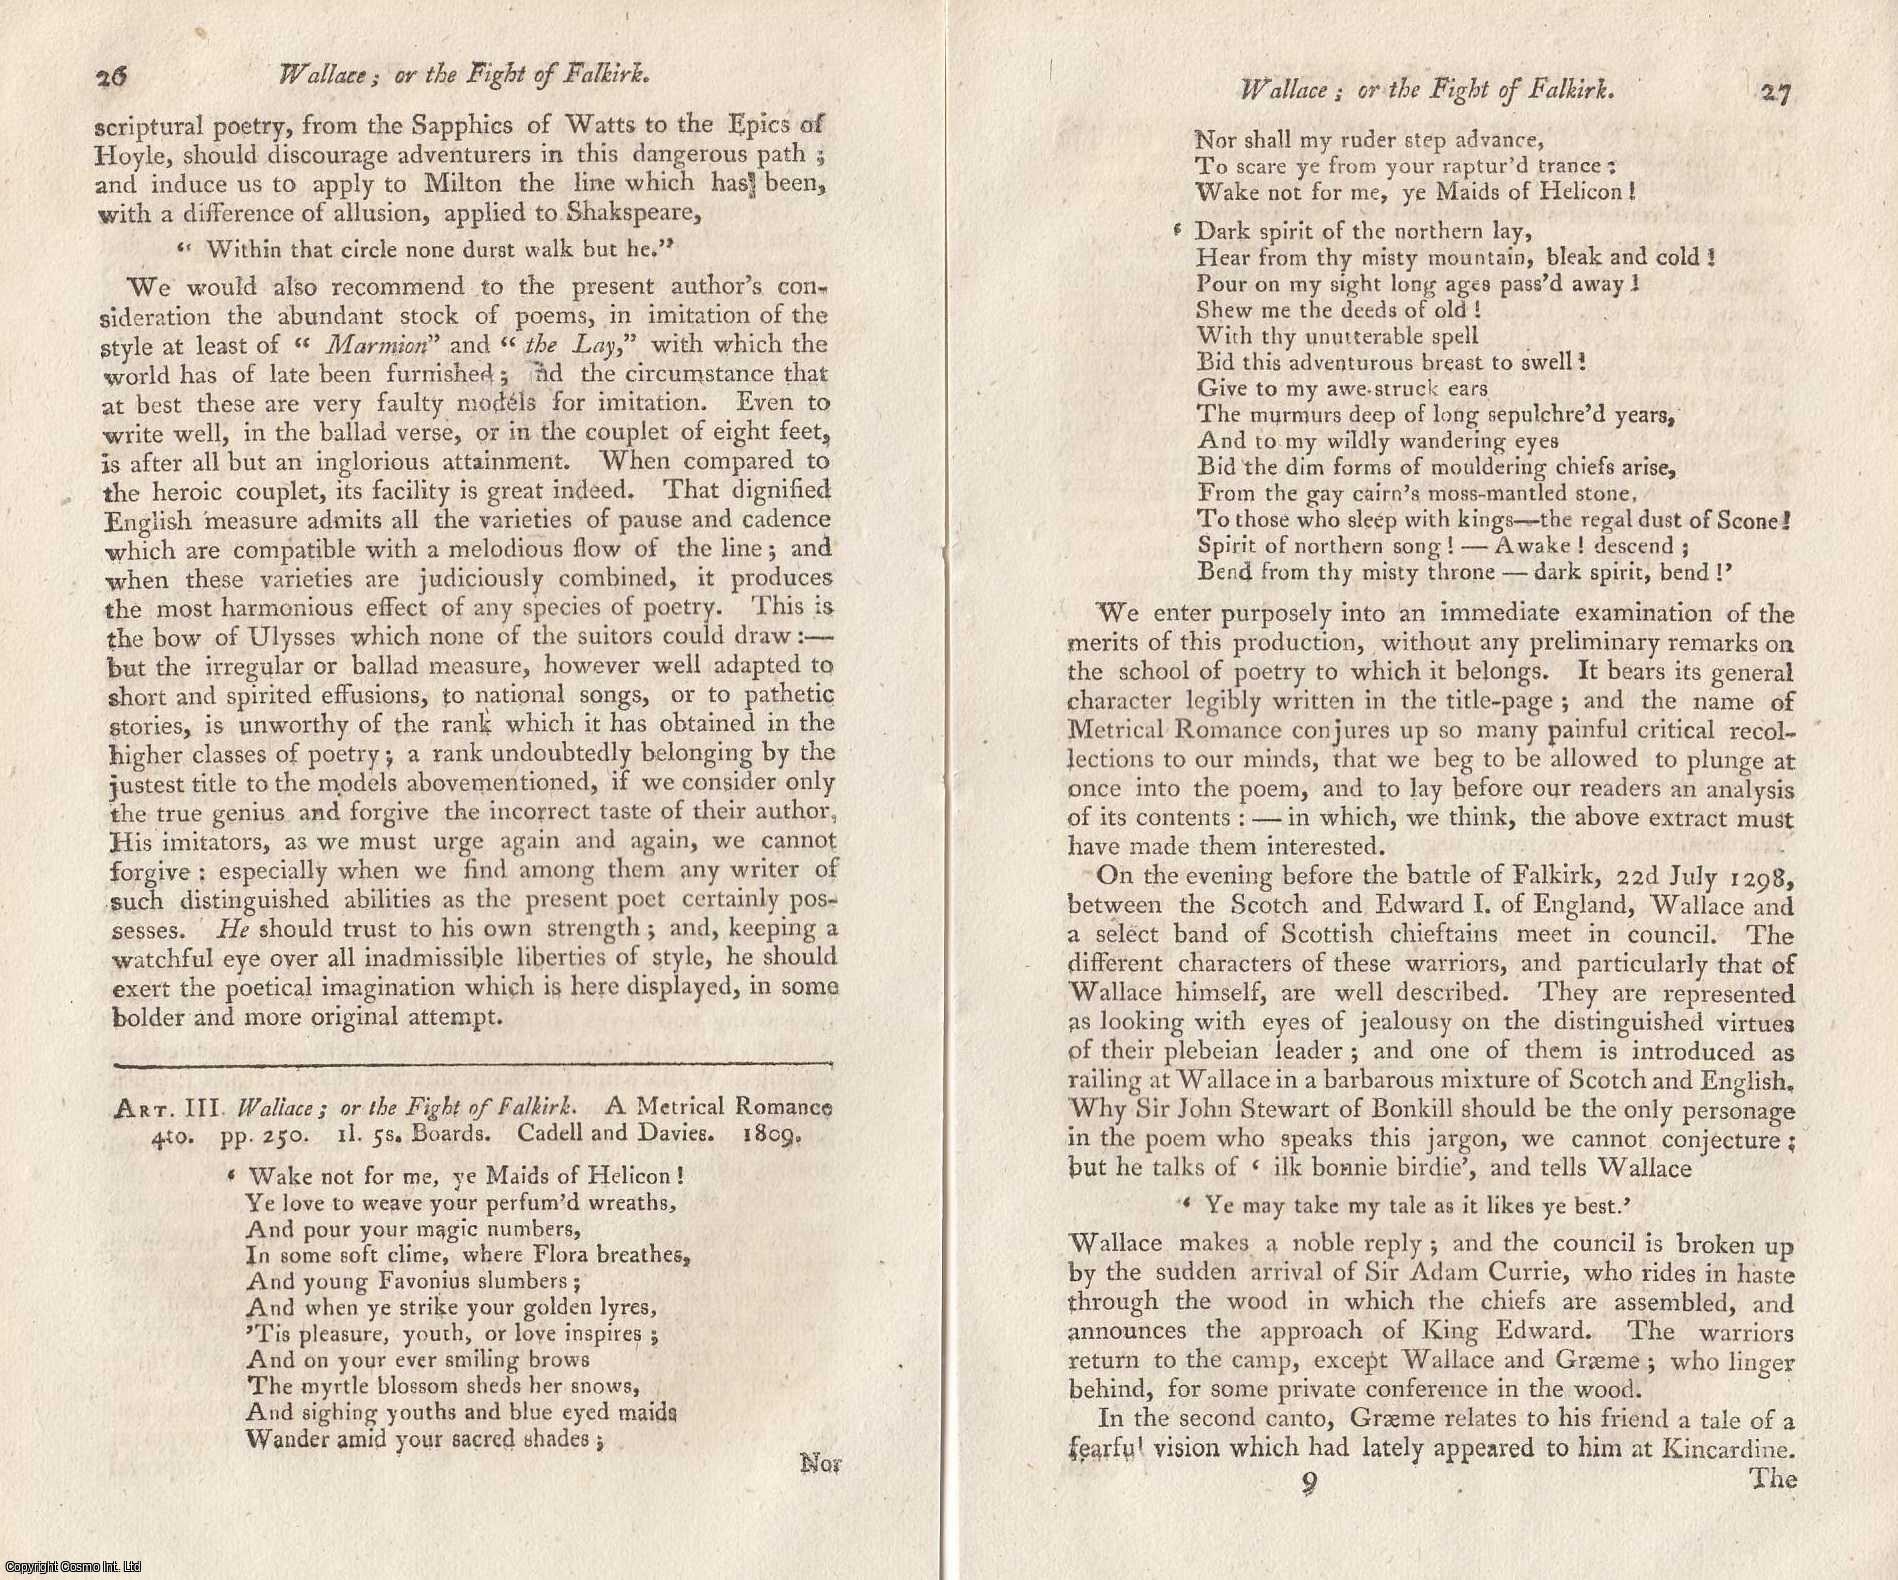 Author Not Stated - Wallace; or The Fight of Falkirk. A Metrical Romance. Published 1809. An original article from the Monthly Review 1810.